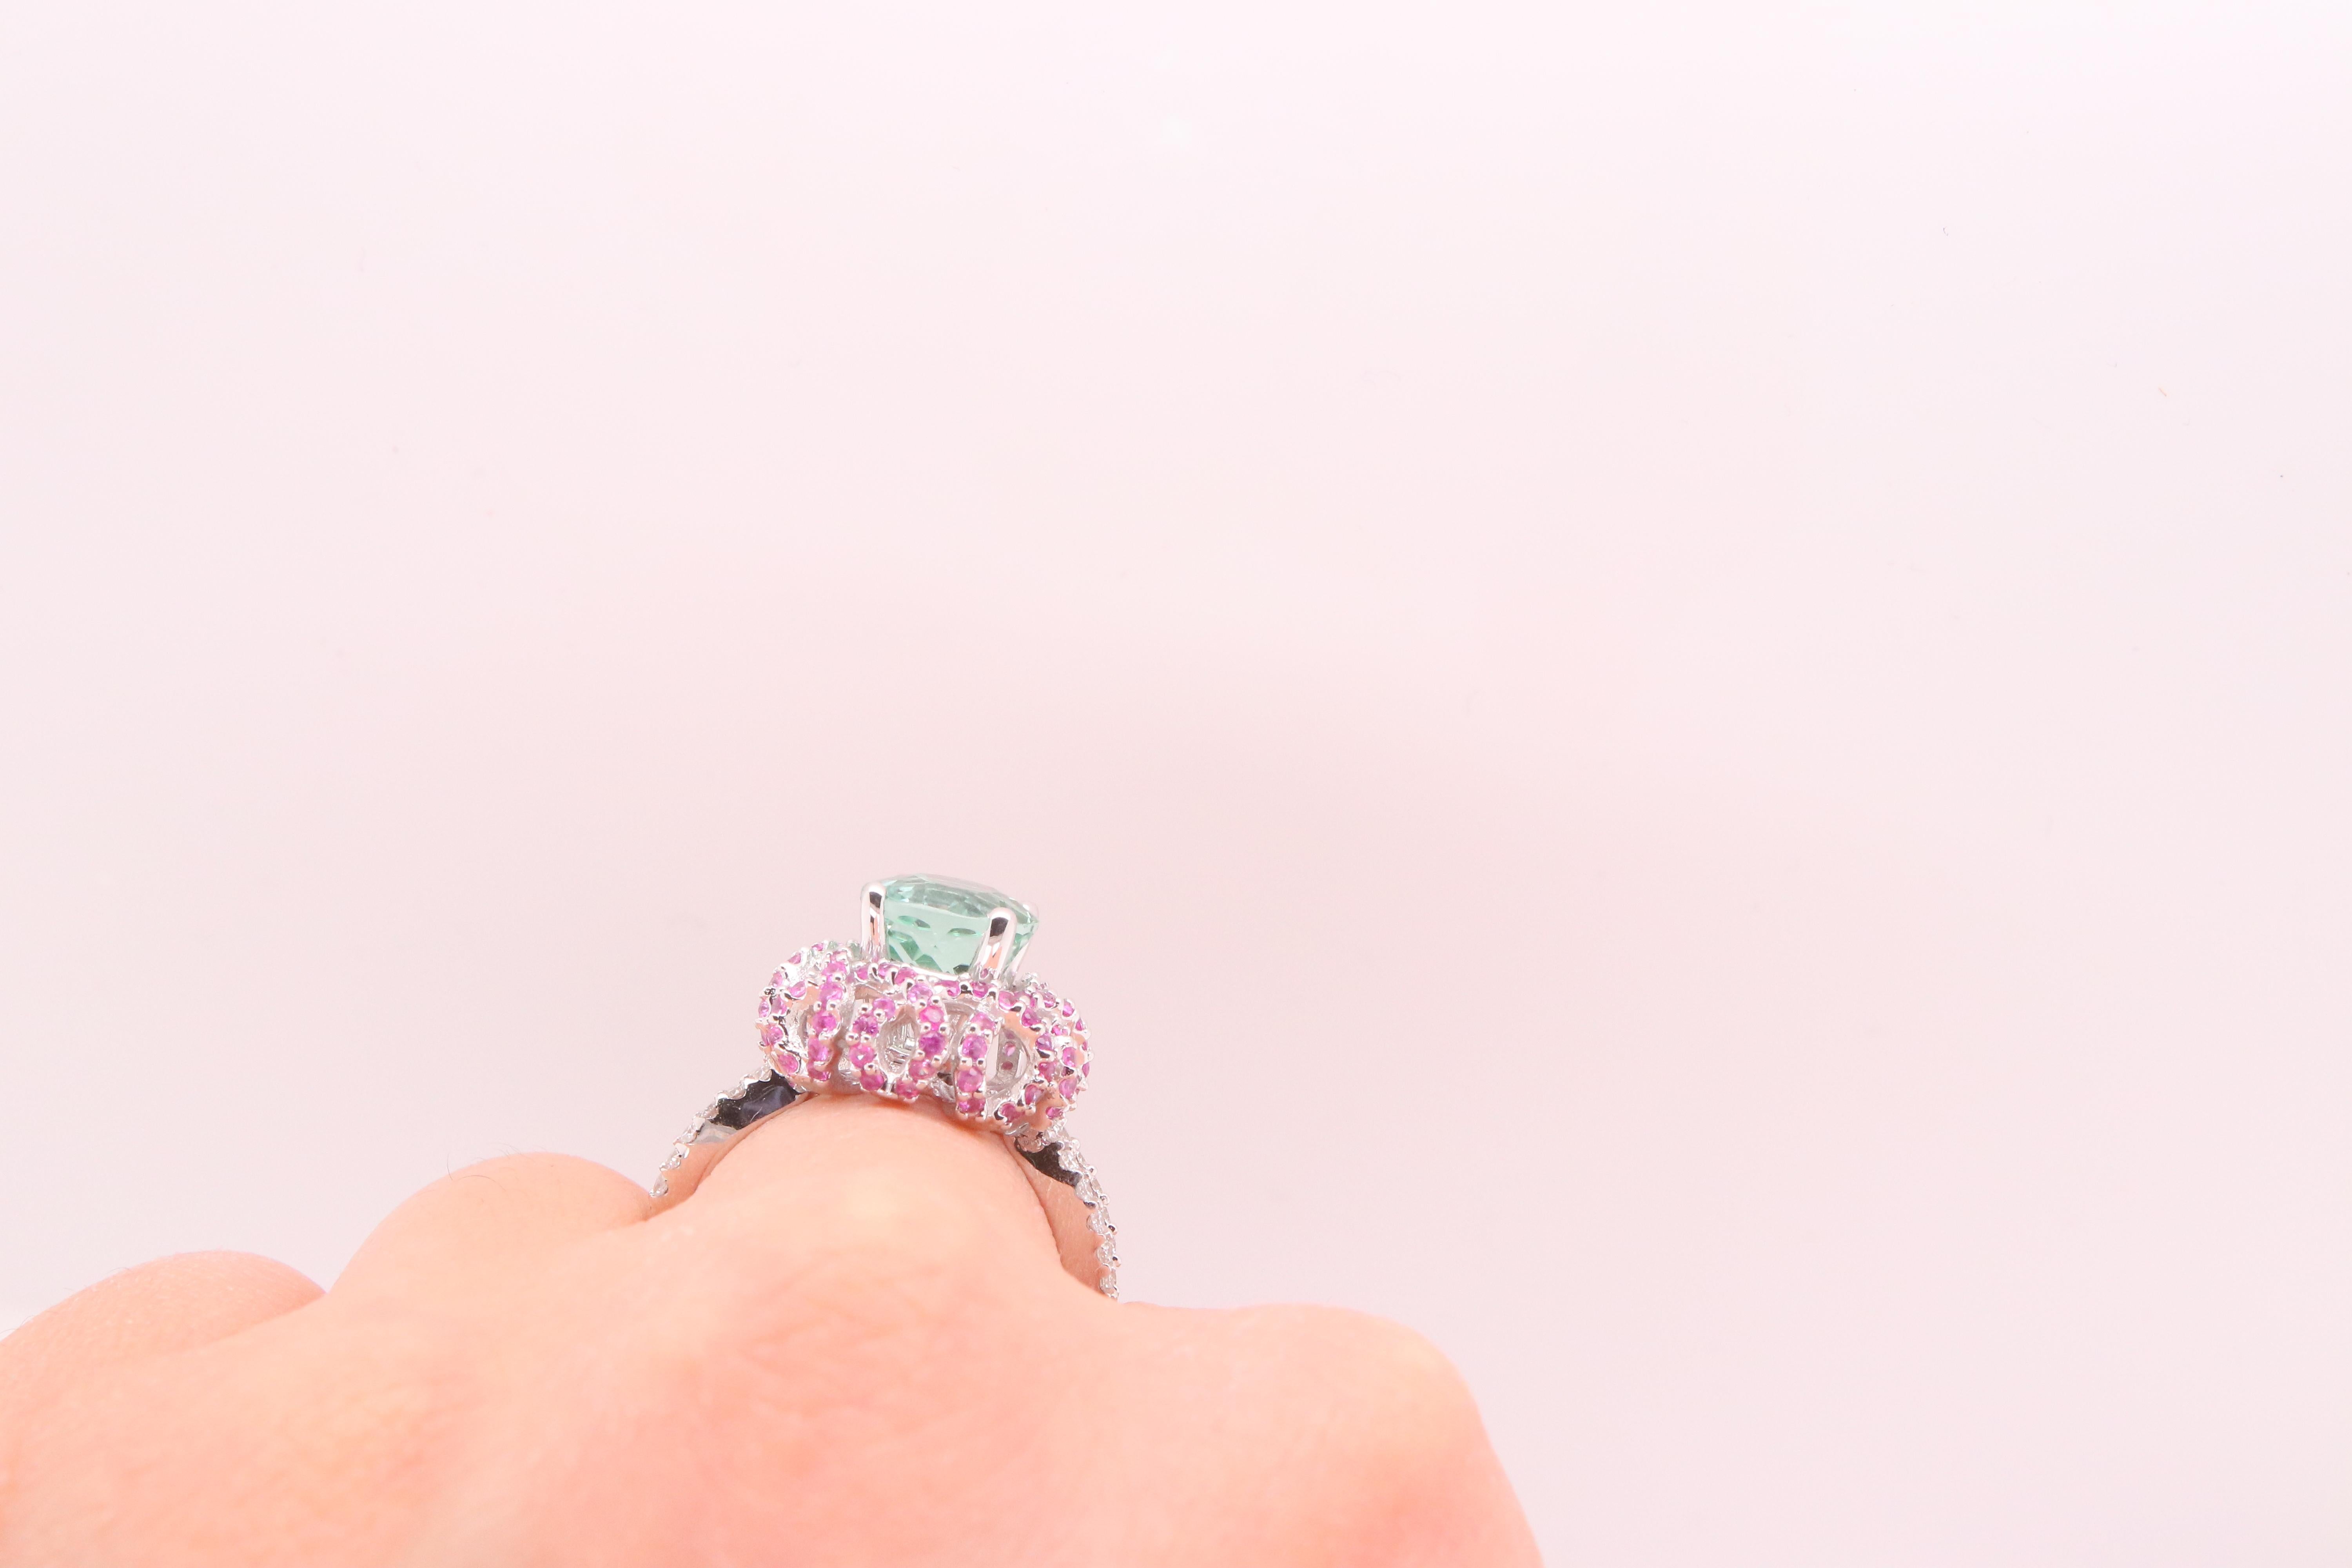 Contemporary 2.4 Carat Green Tourmaline Pink Sapphire and Diamond Ring For Sale